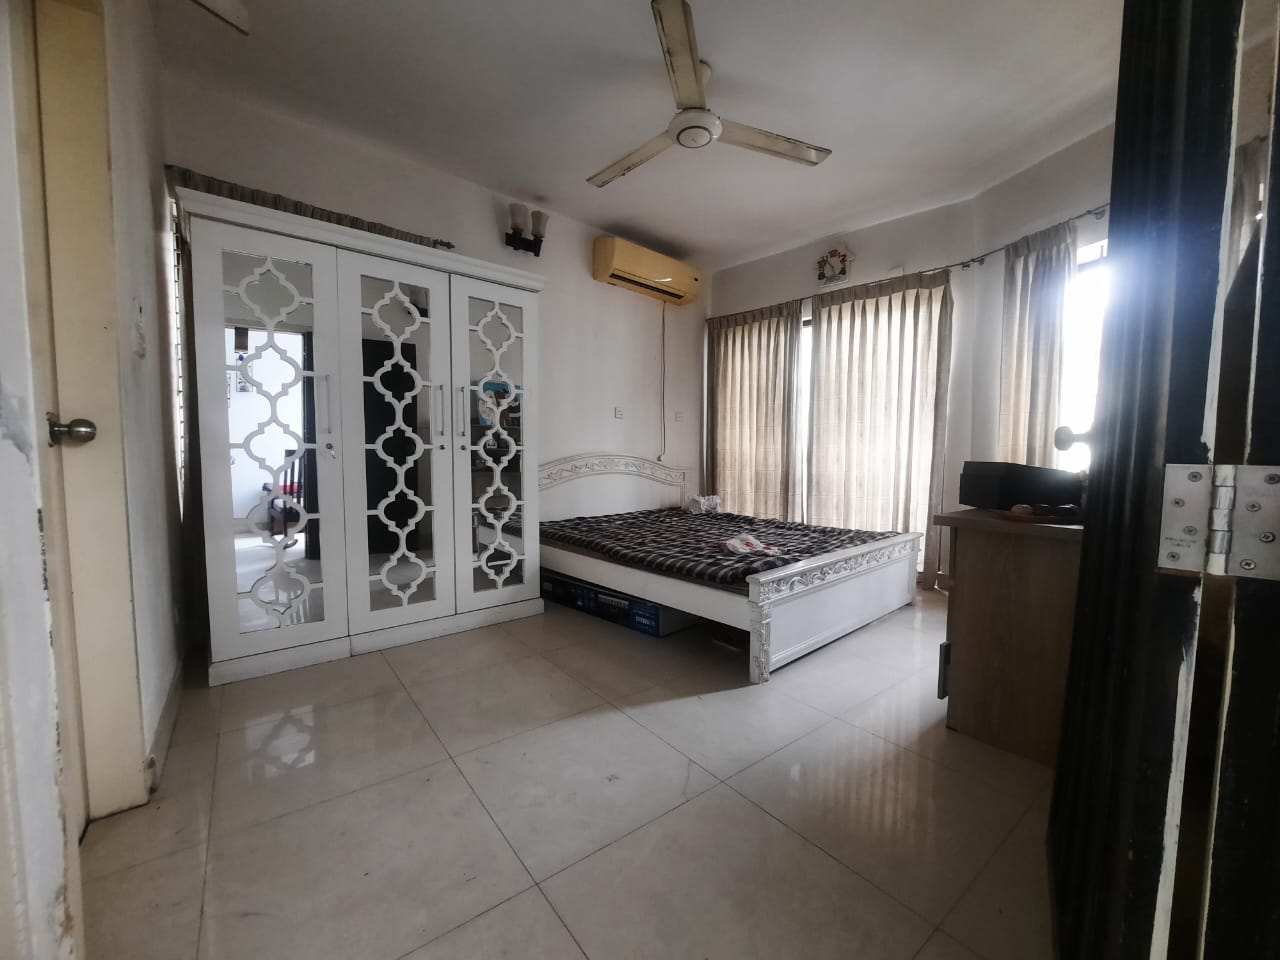 2183 SFT Luxury Apartment for Sale in Gulshan 2 5